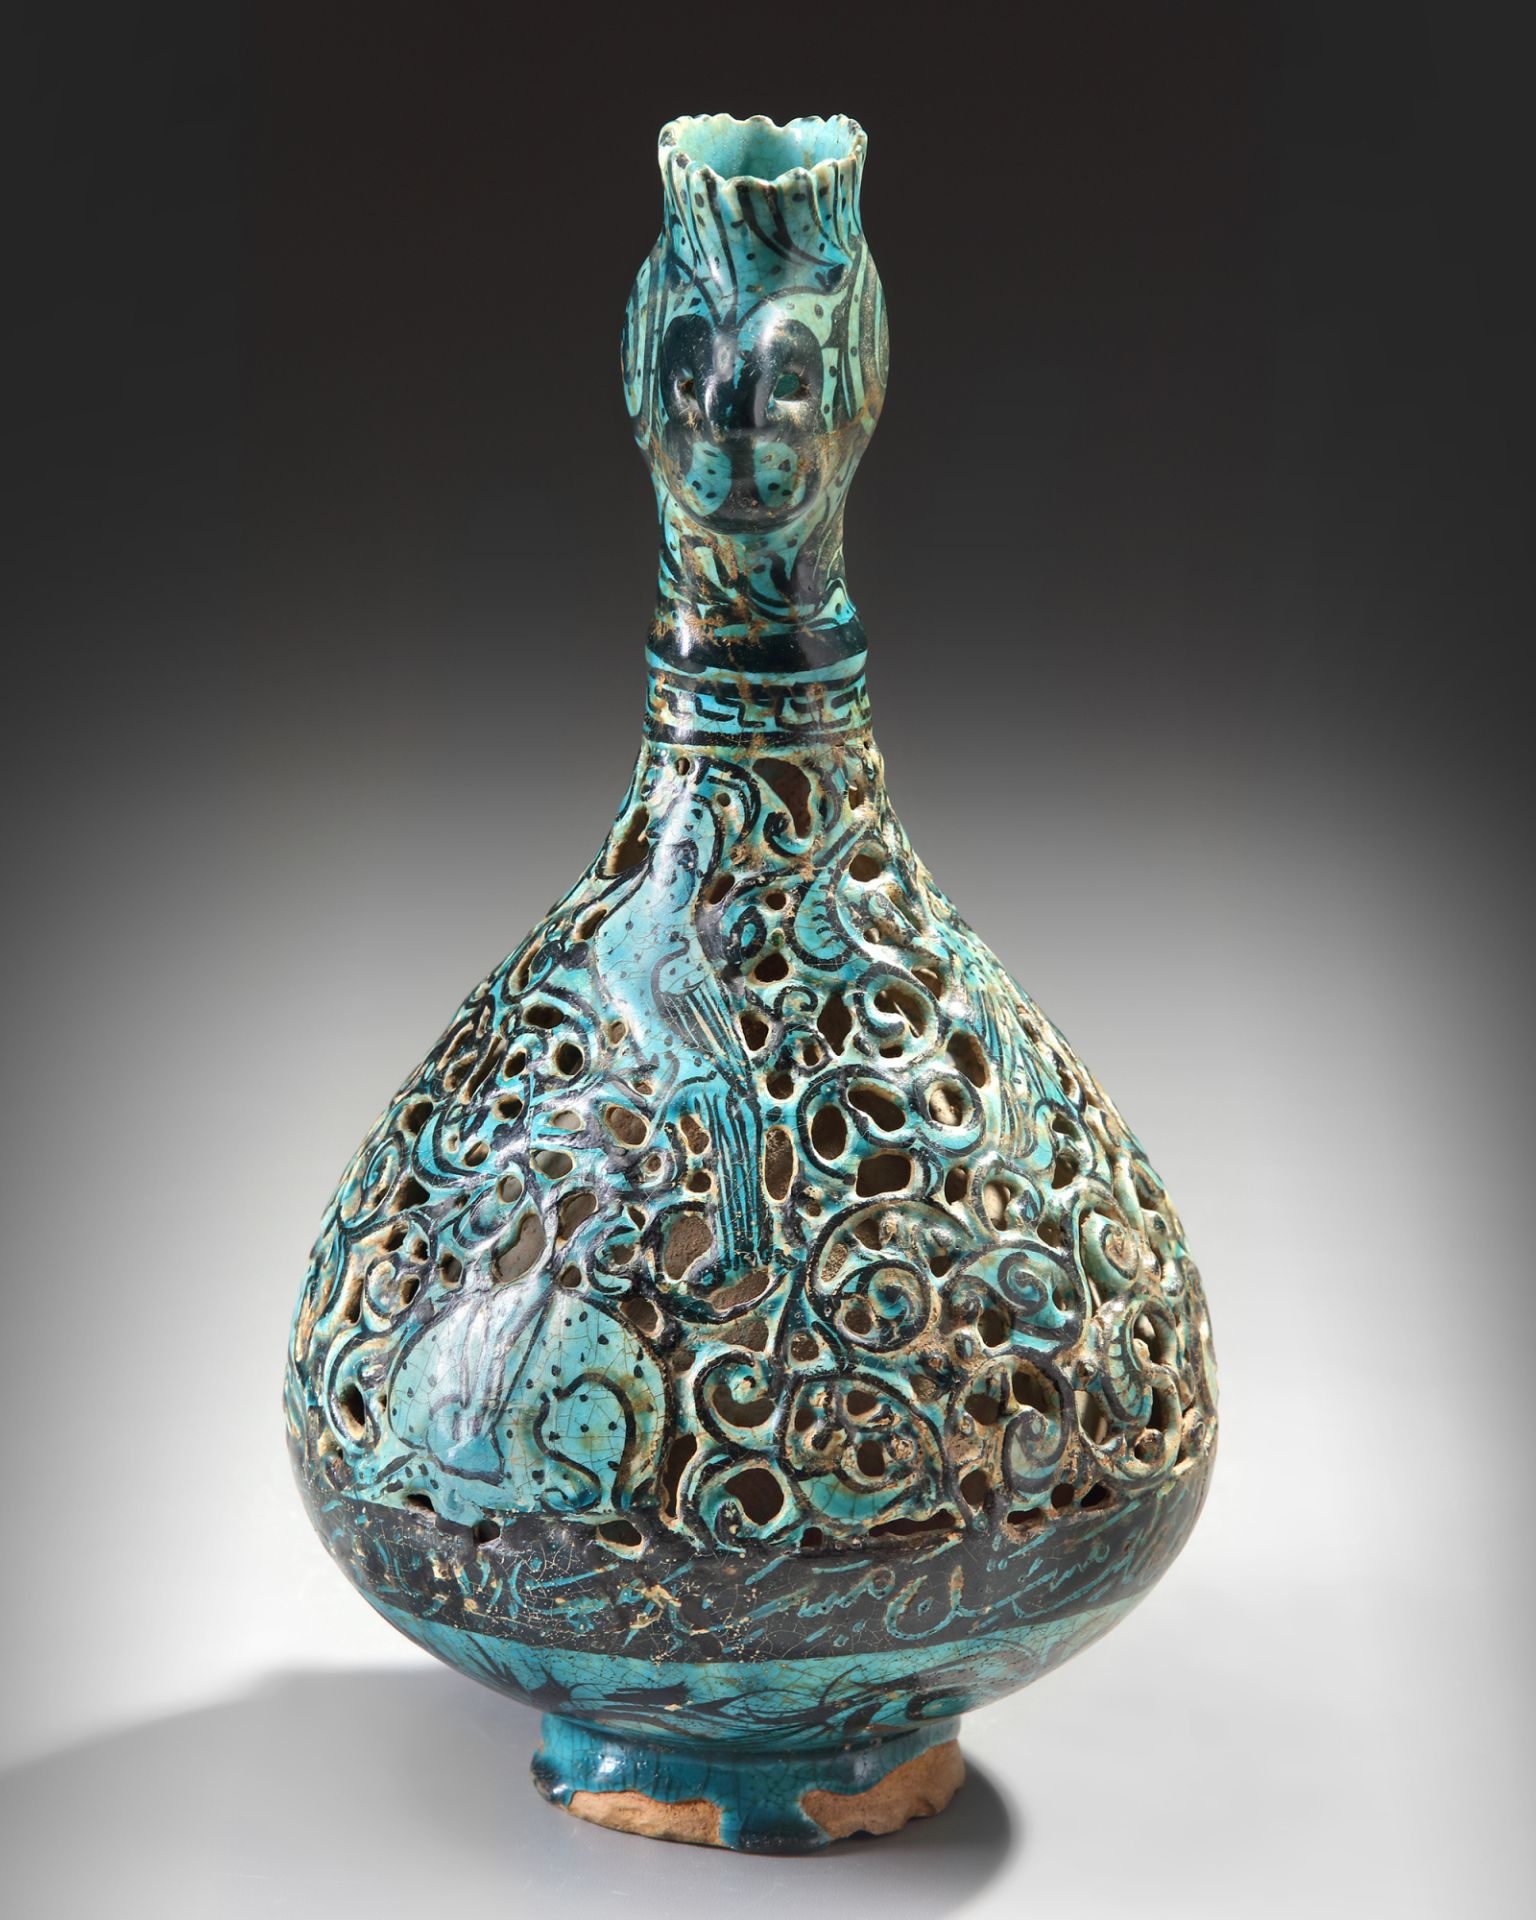 A RARE FRITWARE OPENWORK DECORATED RETICULATED EWER WITH ROOSTER HEAD, PERSIA, 13TH CENTURY - Image 3 of 16